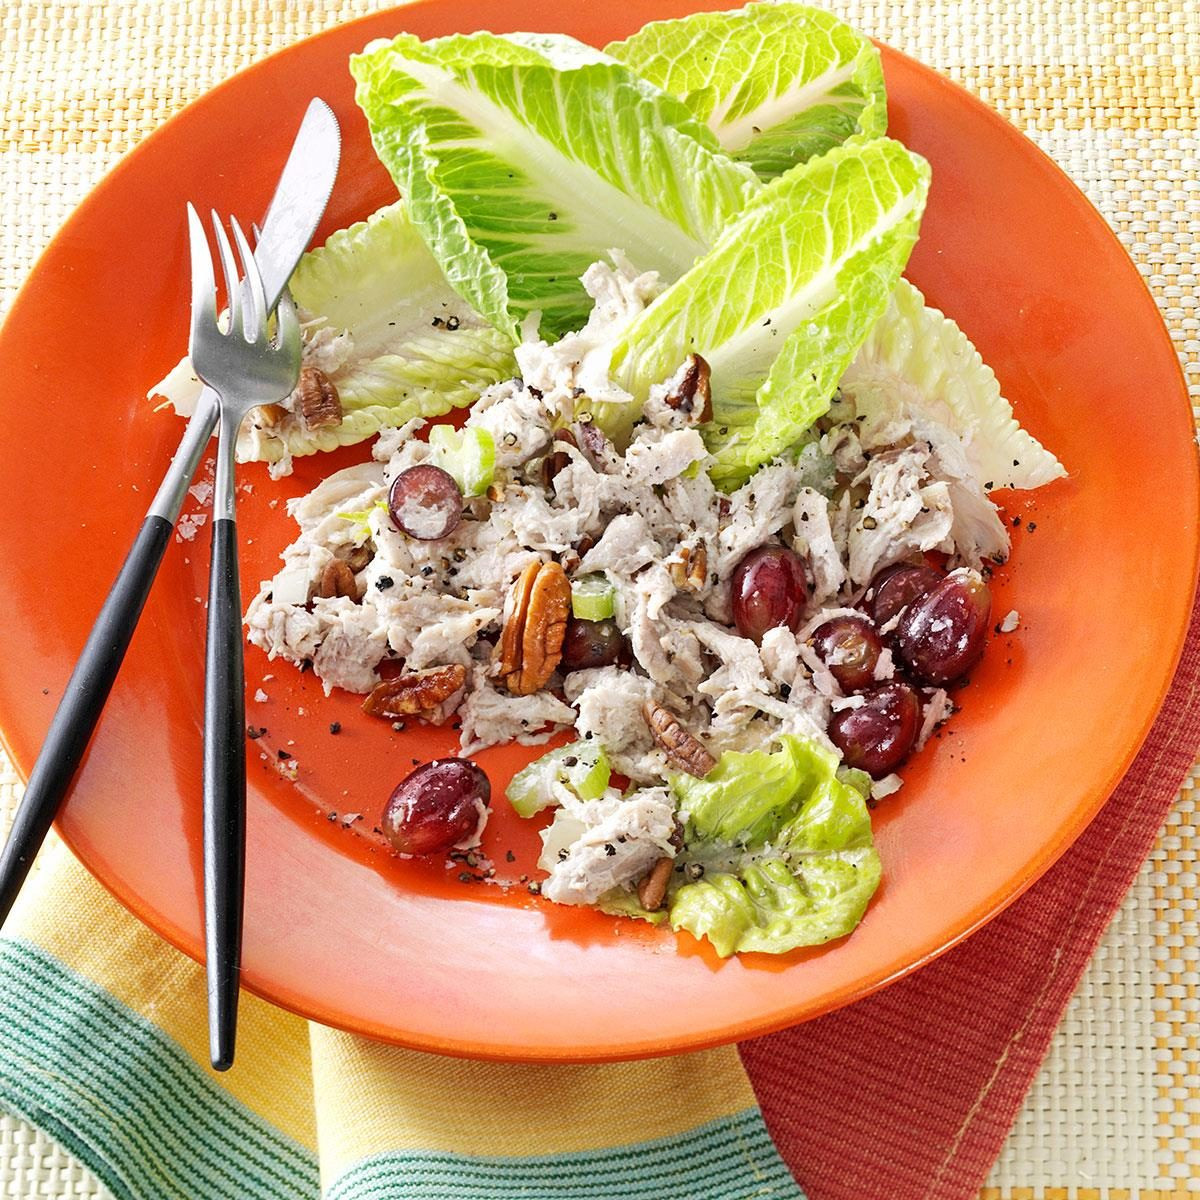 Chicken Salad With Grapes And Nuts
 Chunky Chicken Salad with Grapes and Pecans Recipe